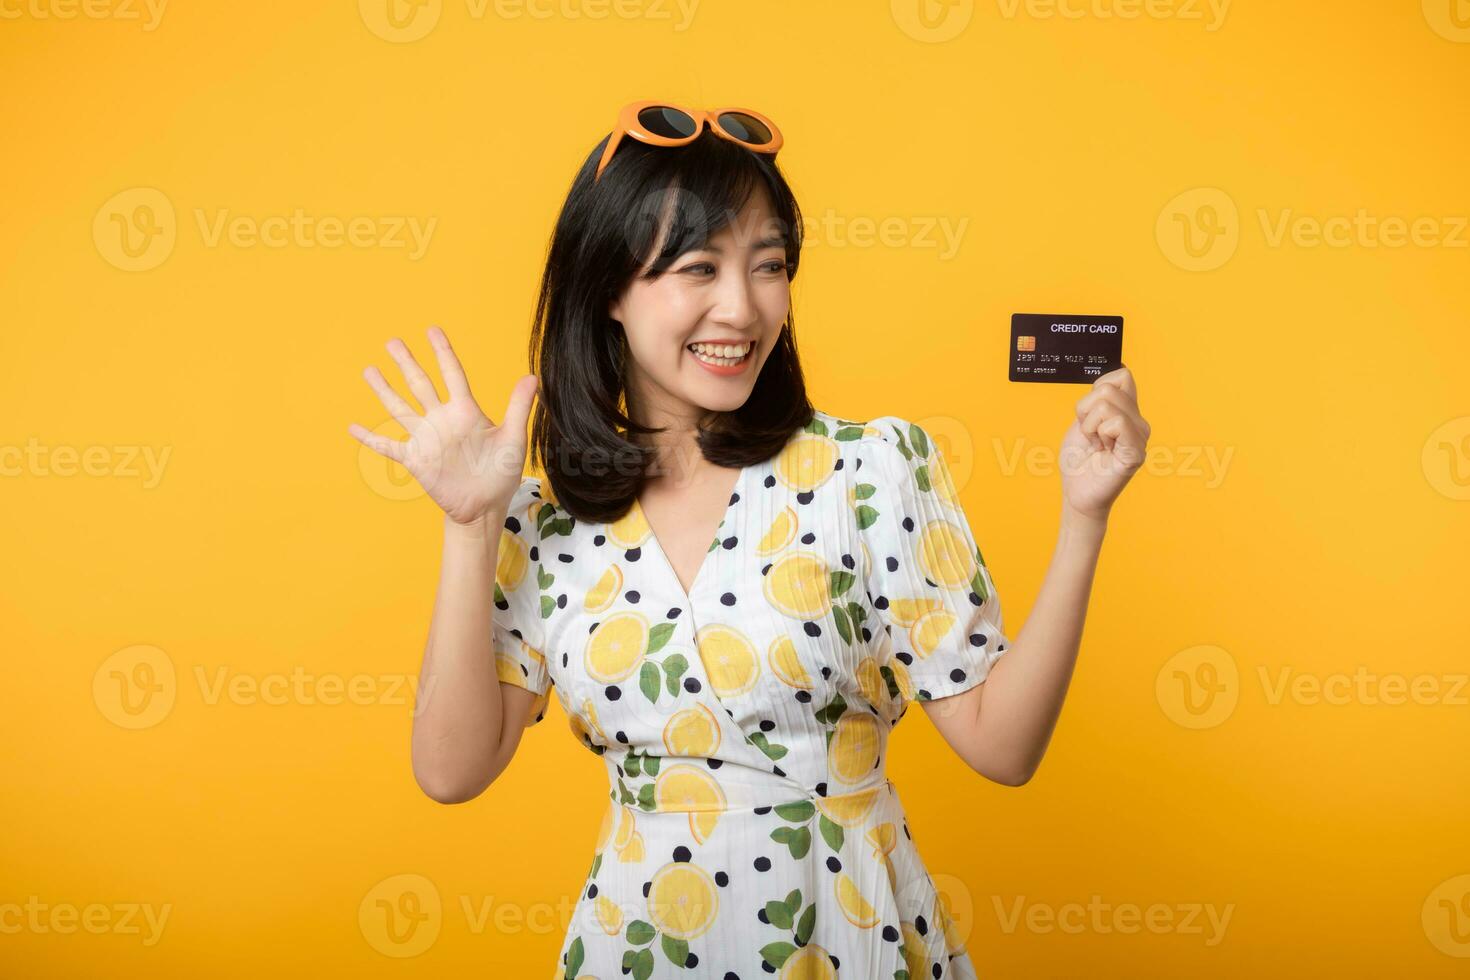 Portrait young asian woman happy smiling in springtime dress showing plastic credit card isolated on yellow background. Pay, money and purchase shopping payment concept. photo